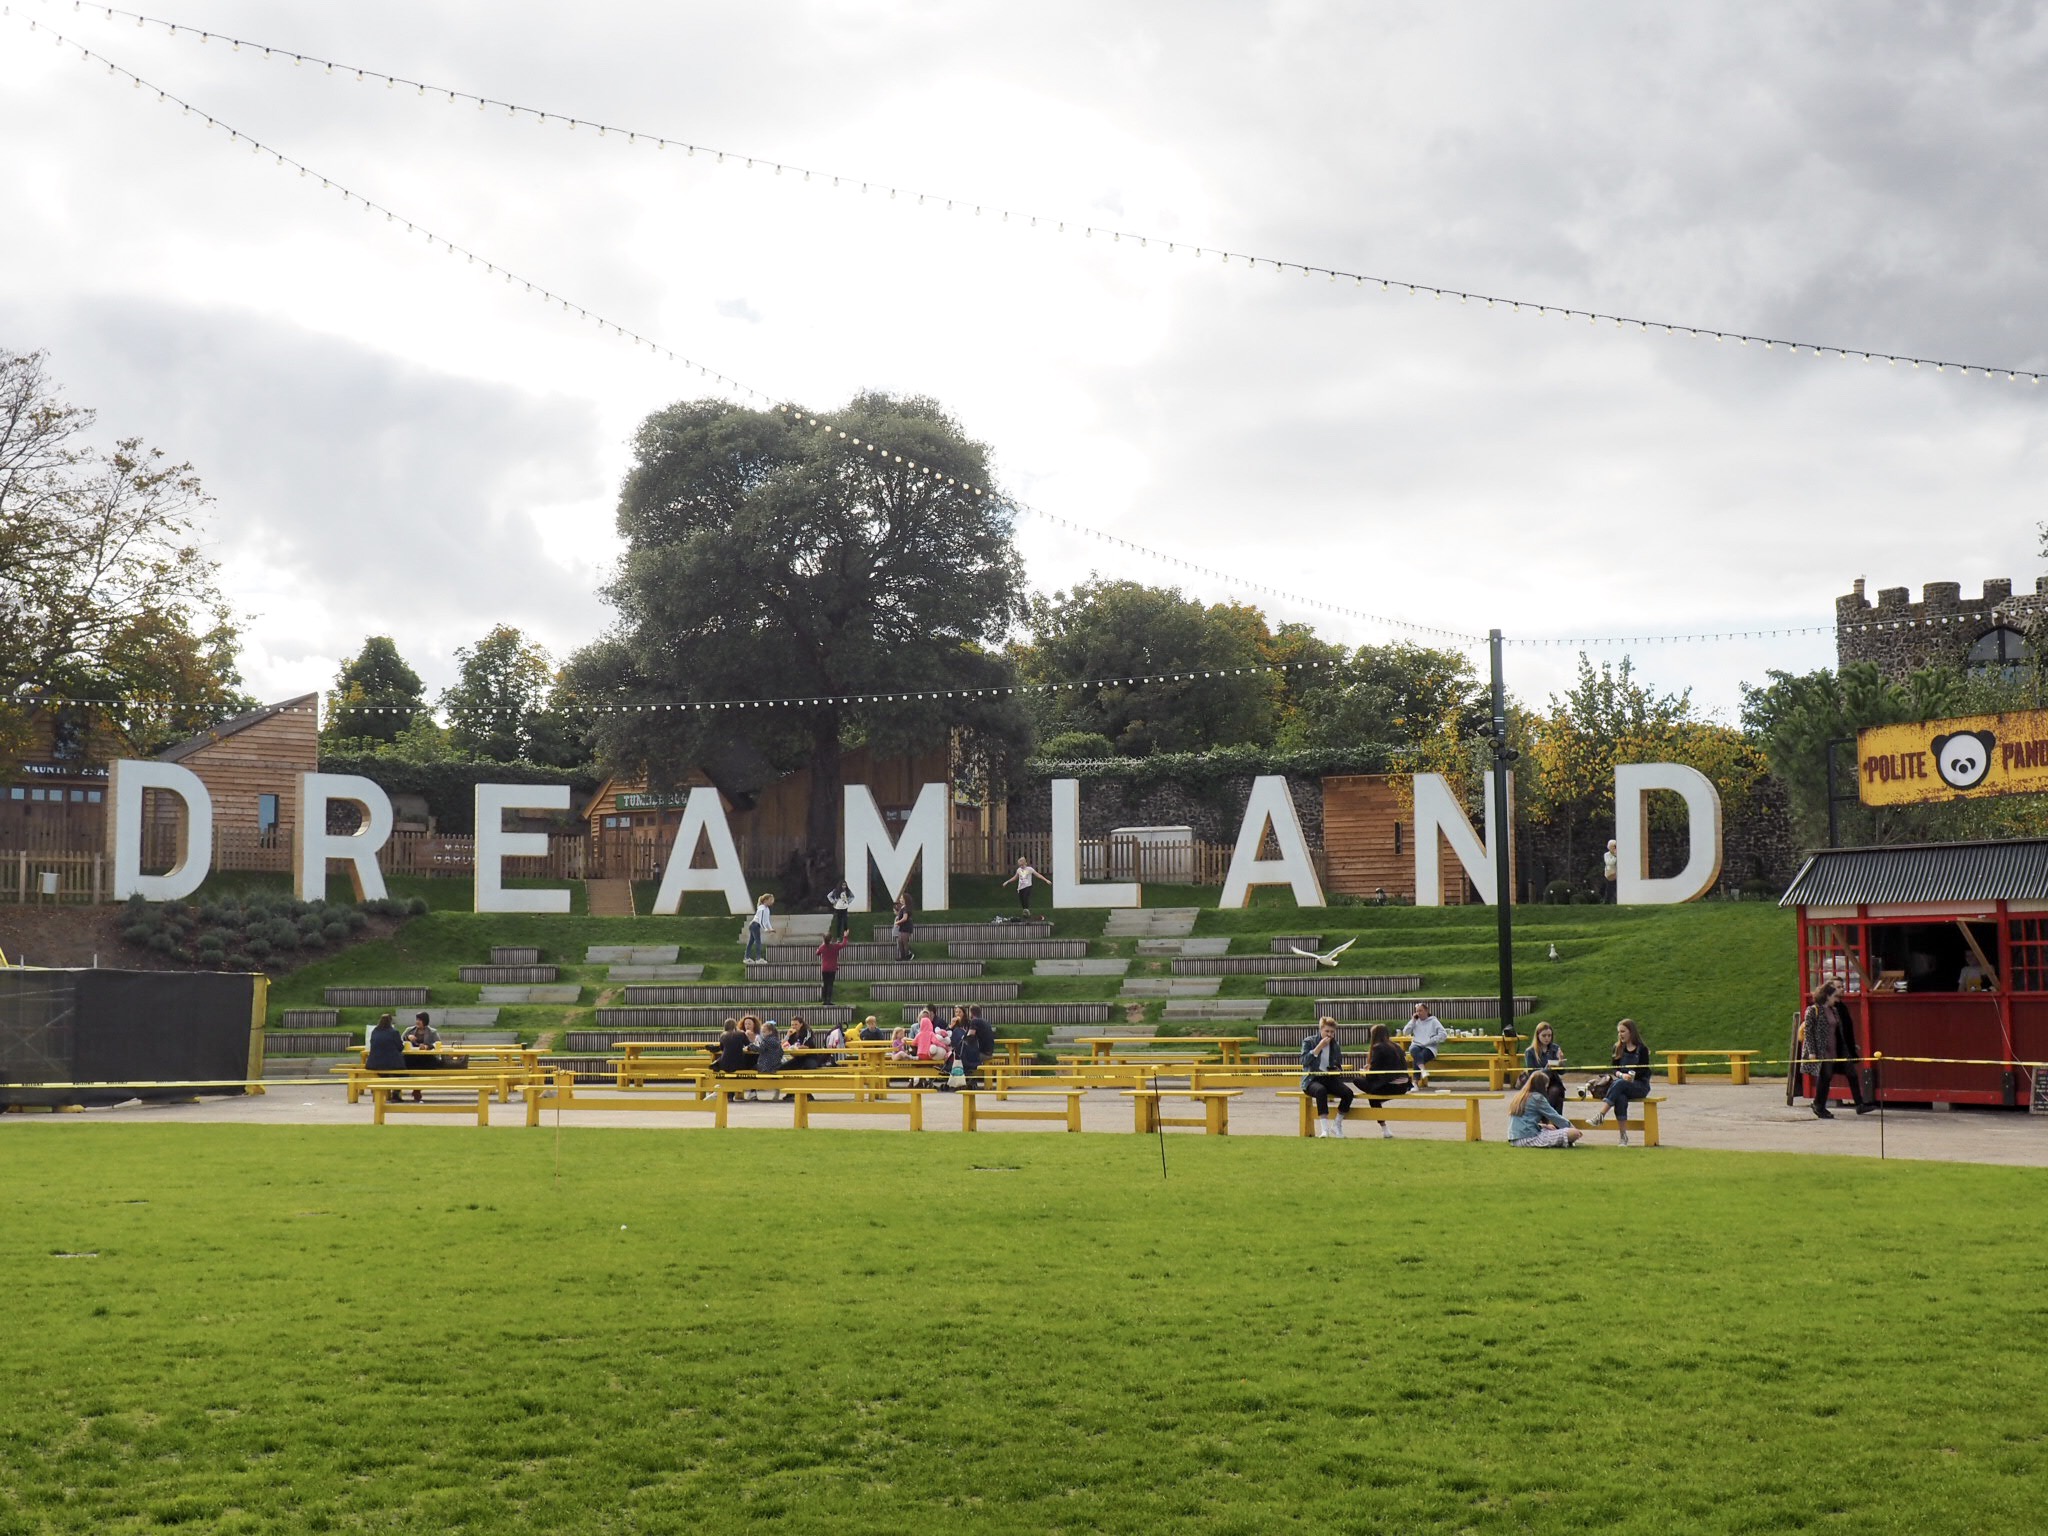 Dreamland sign in Margate